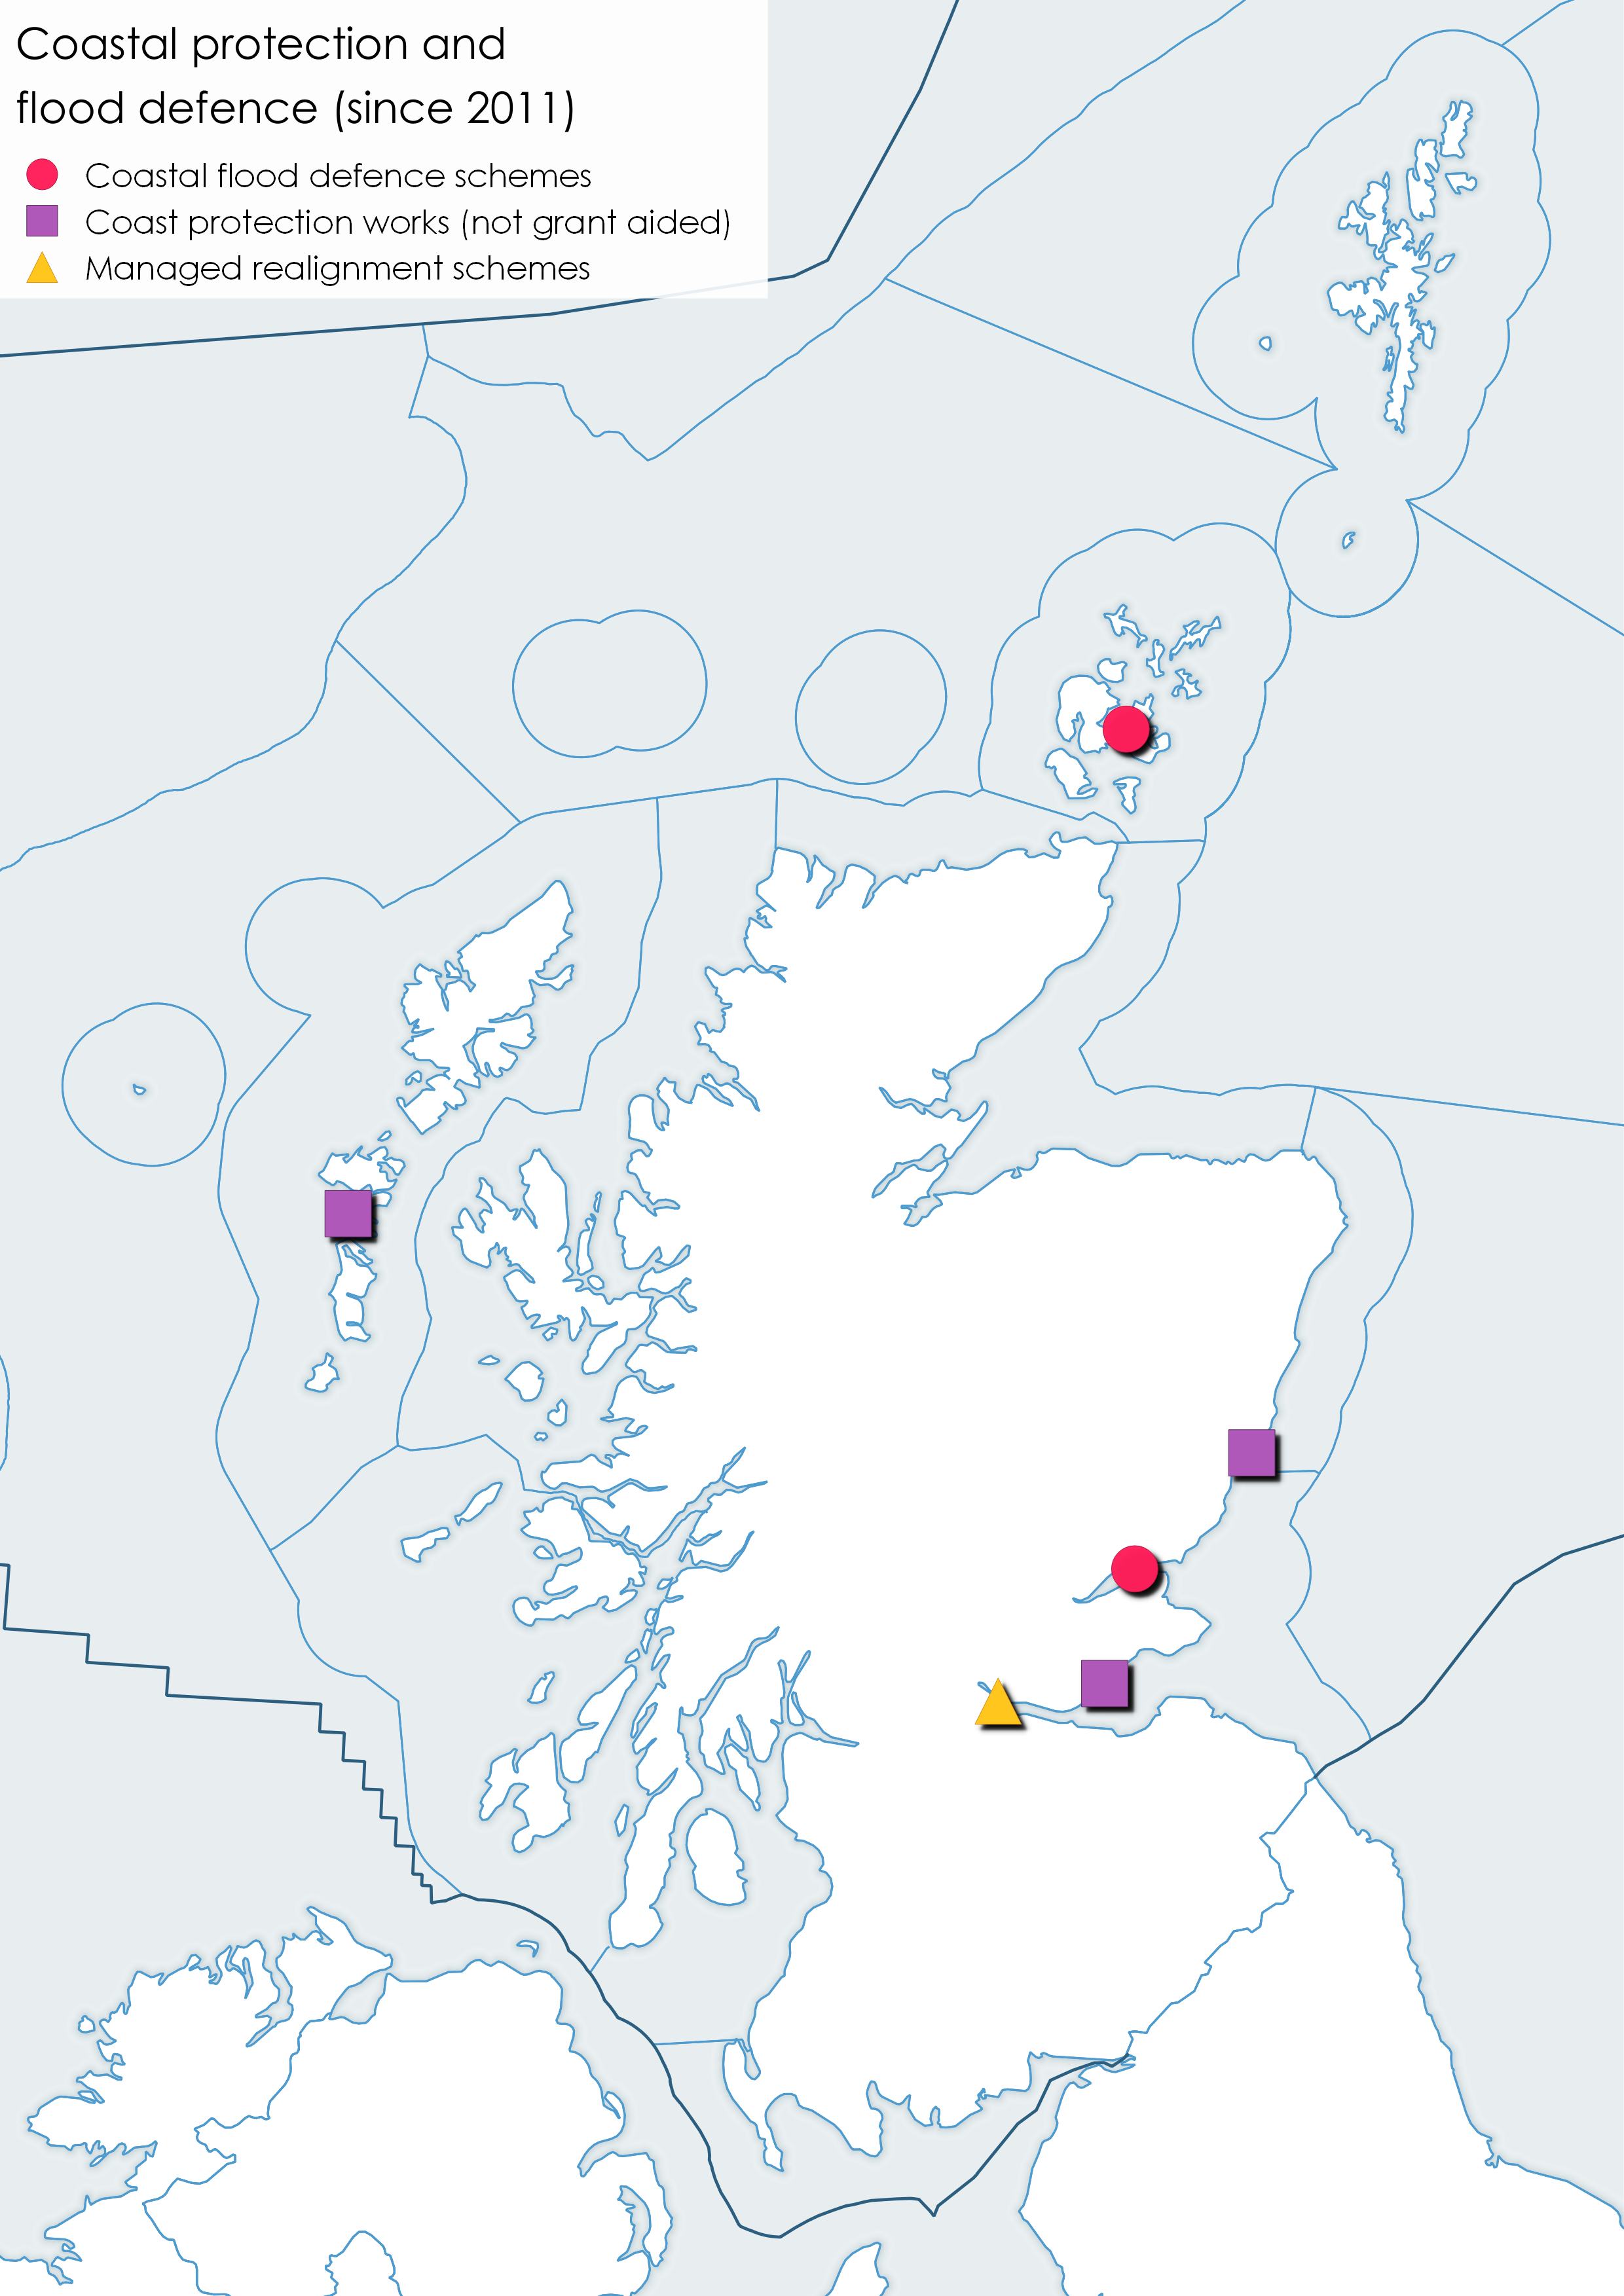 Figure 2: map with scheme locations since 2011. Source: Marine Scotland, Scottish Government and SEPA.